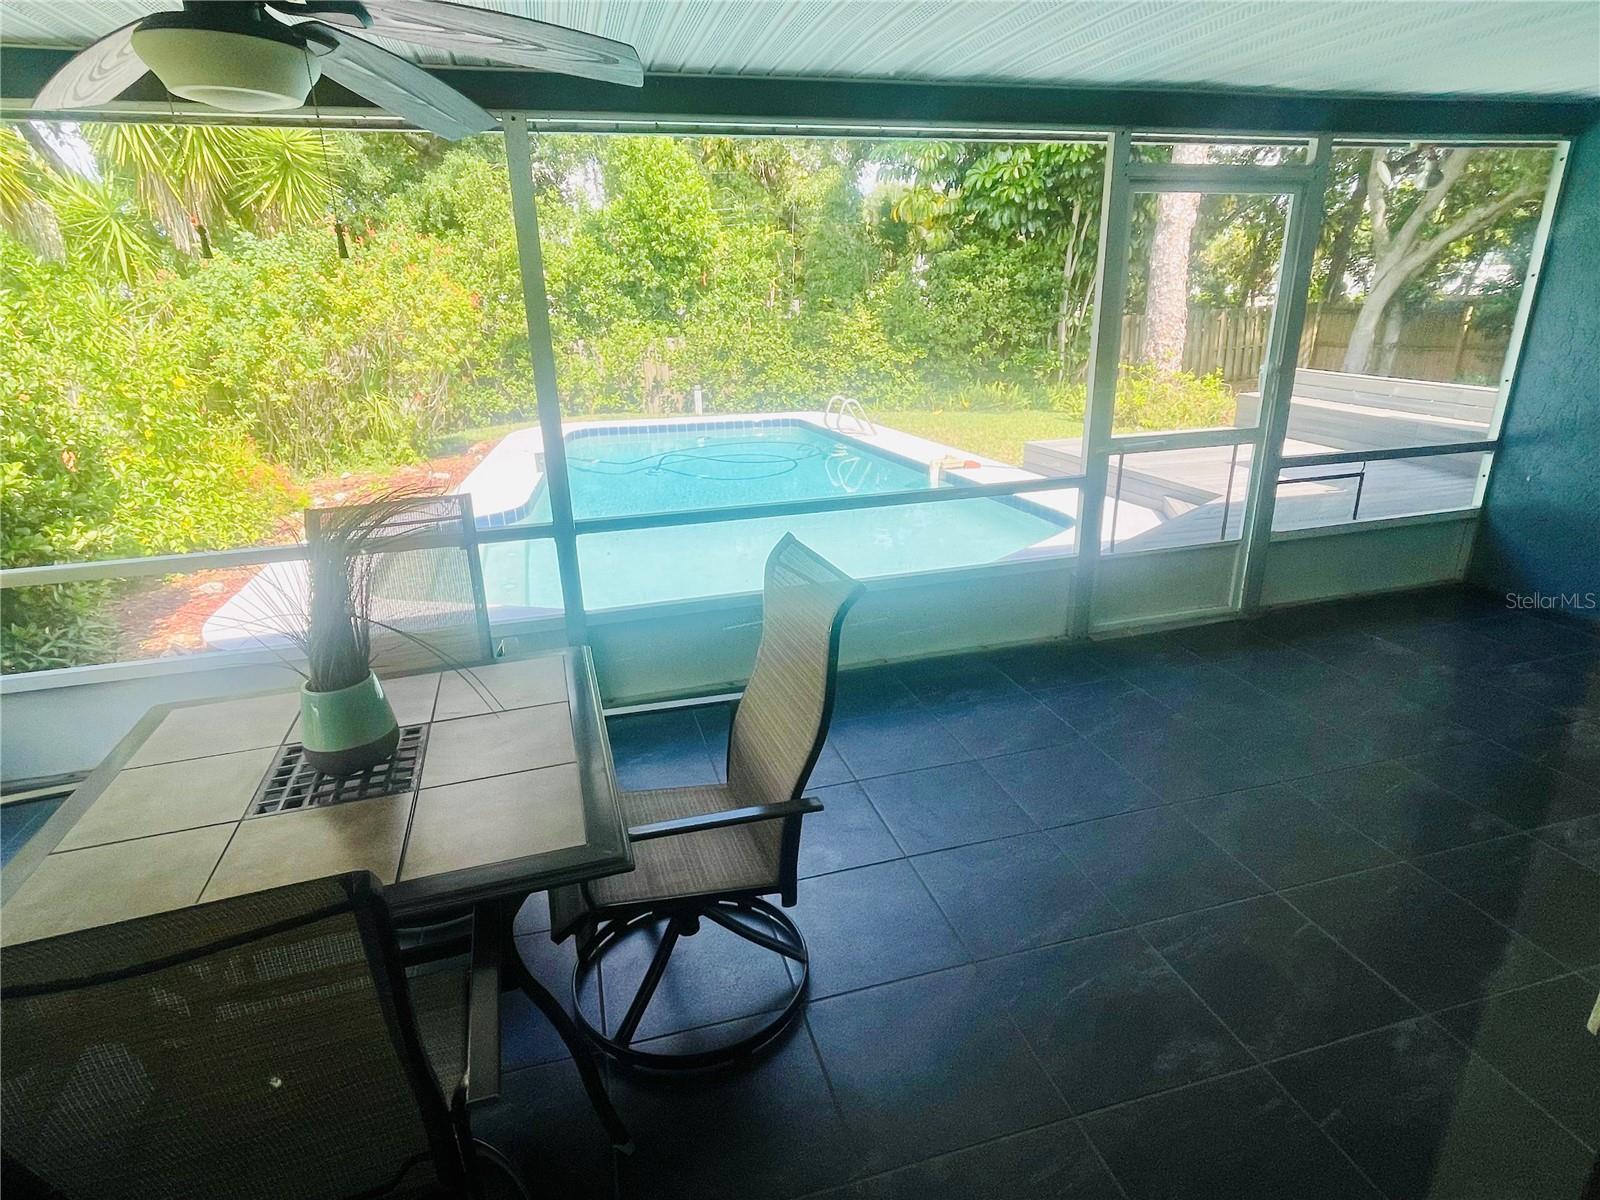 Screened lanai overlooking the pool and superb backyard with room for the dog to run or for a swingset.